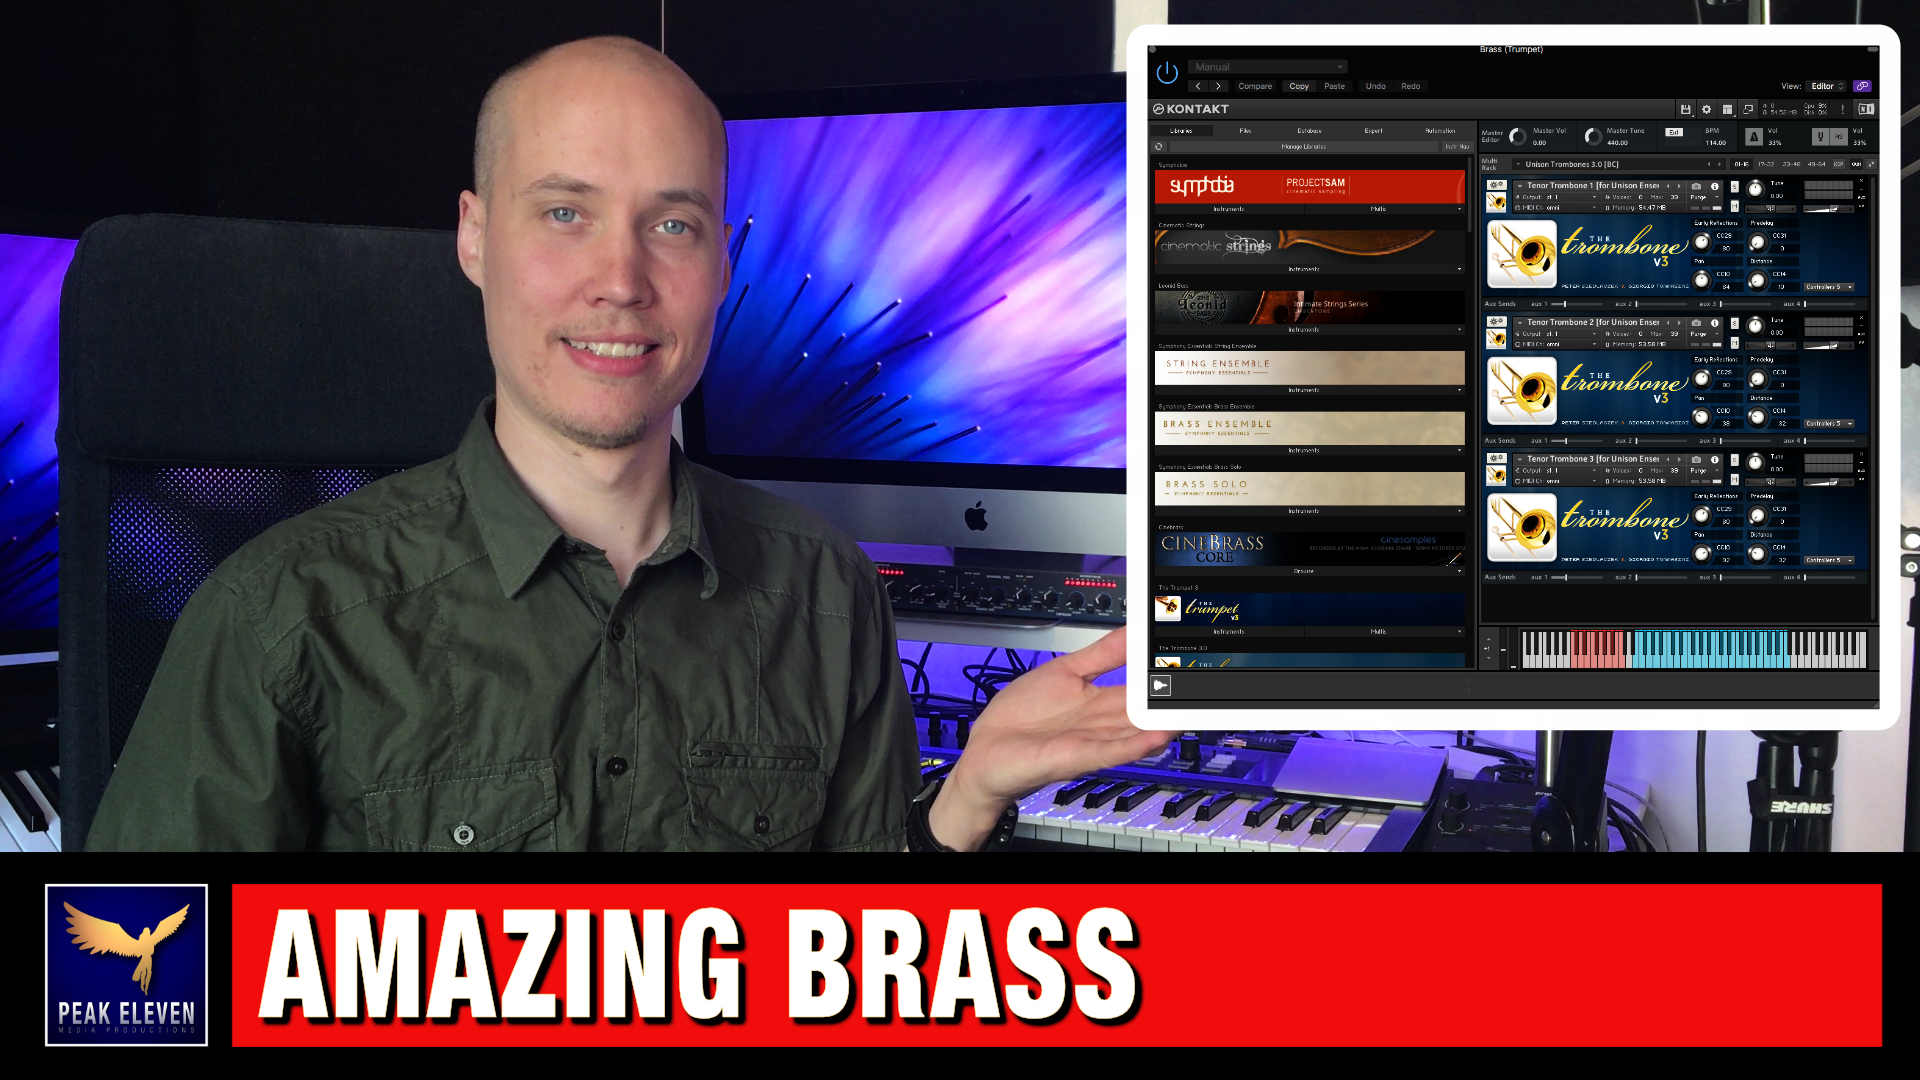 Sample Modeling Brass - Quick Review